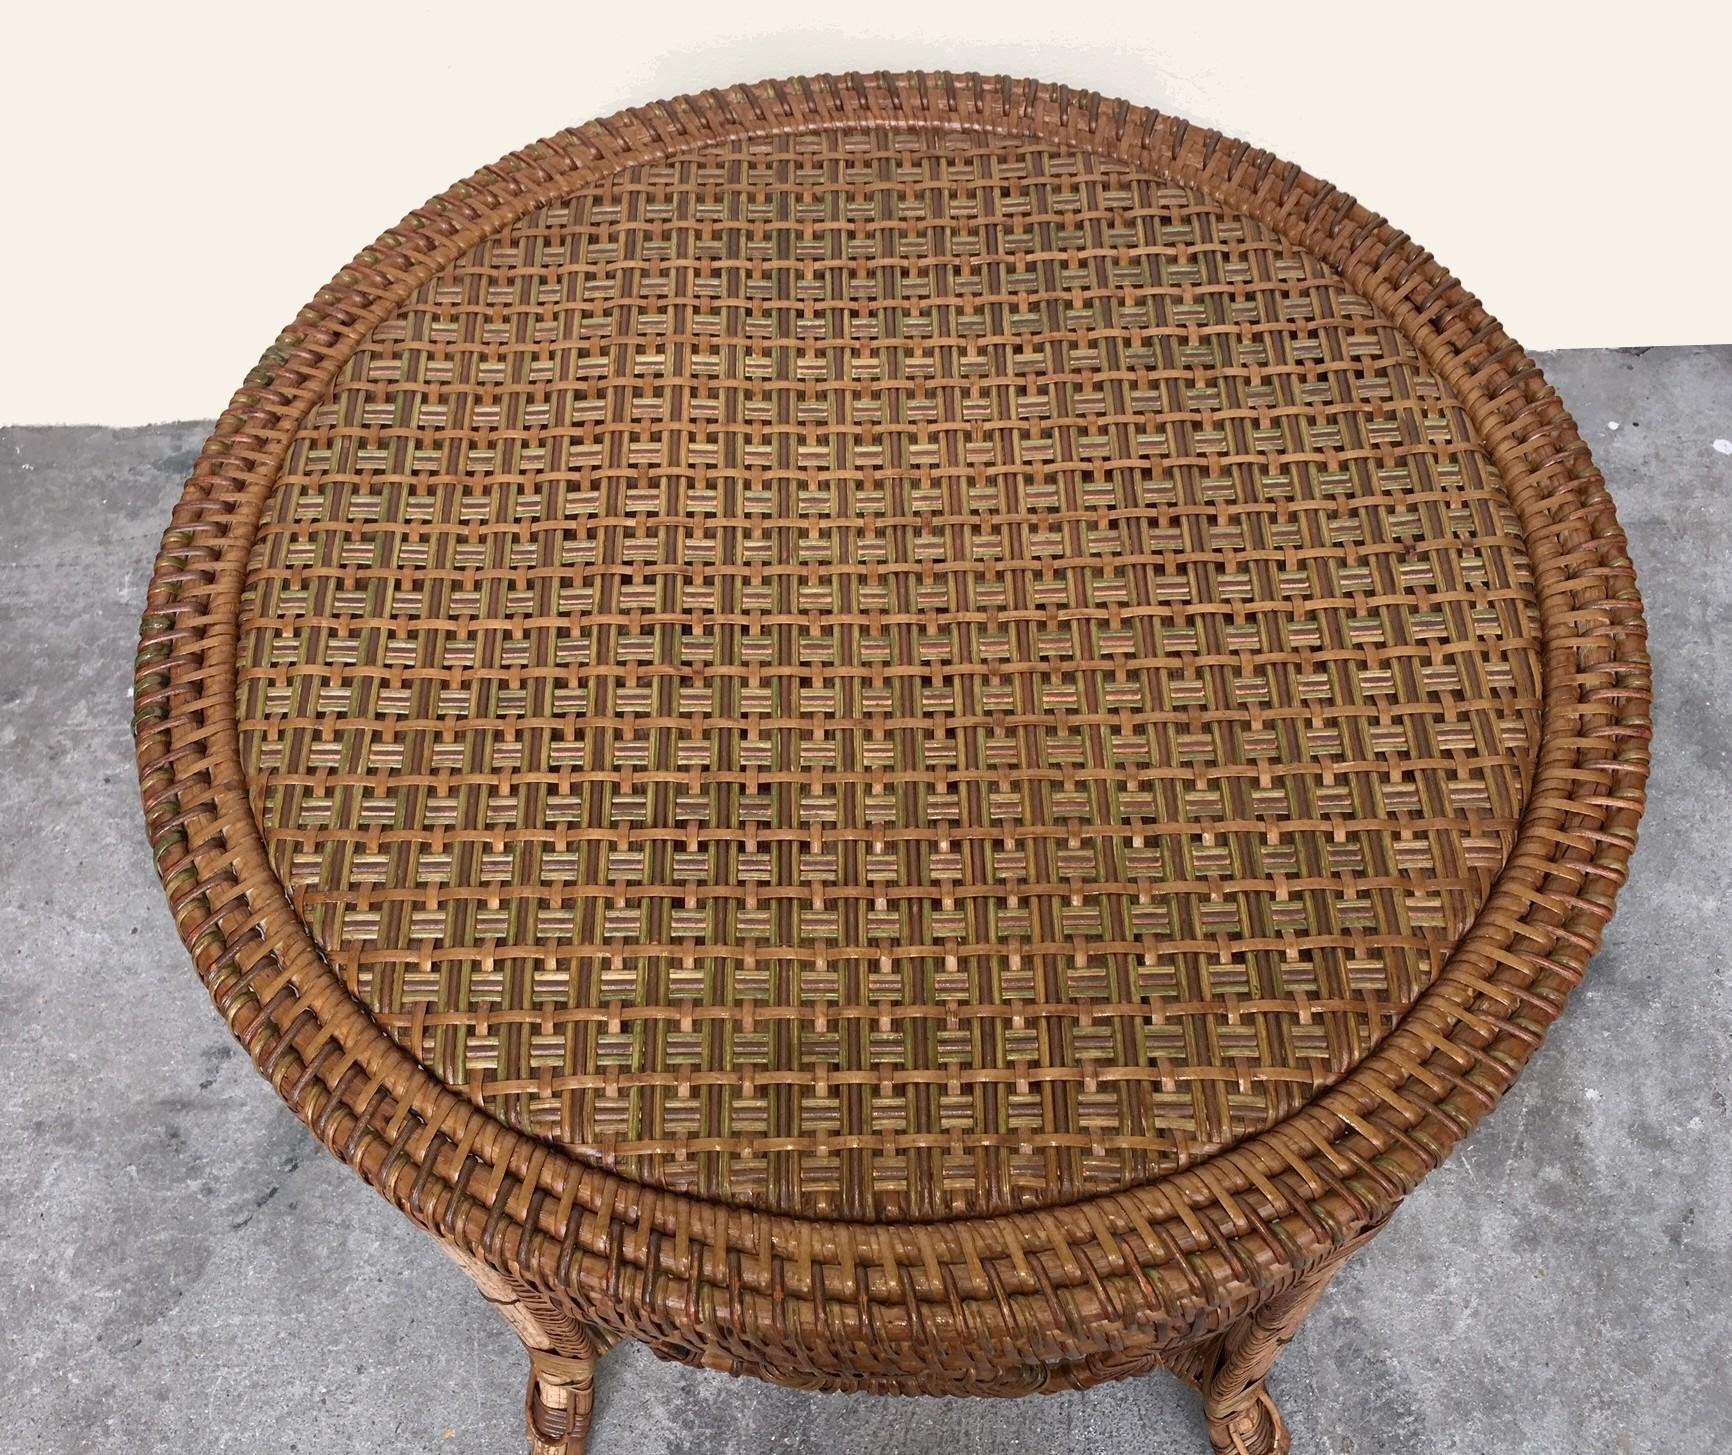 French Rattan Garden Furniture Set by Maison Perret Vibert, Second Half of 19th Century For Sale